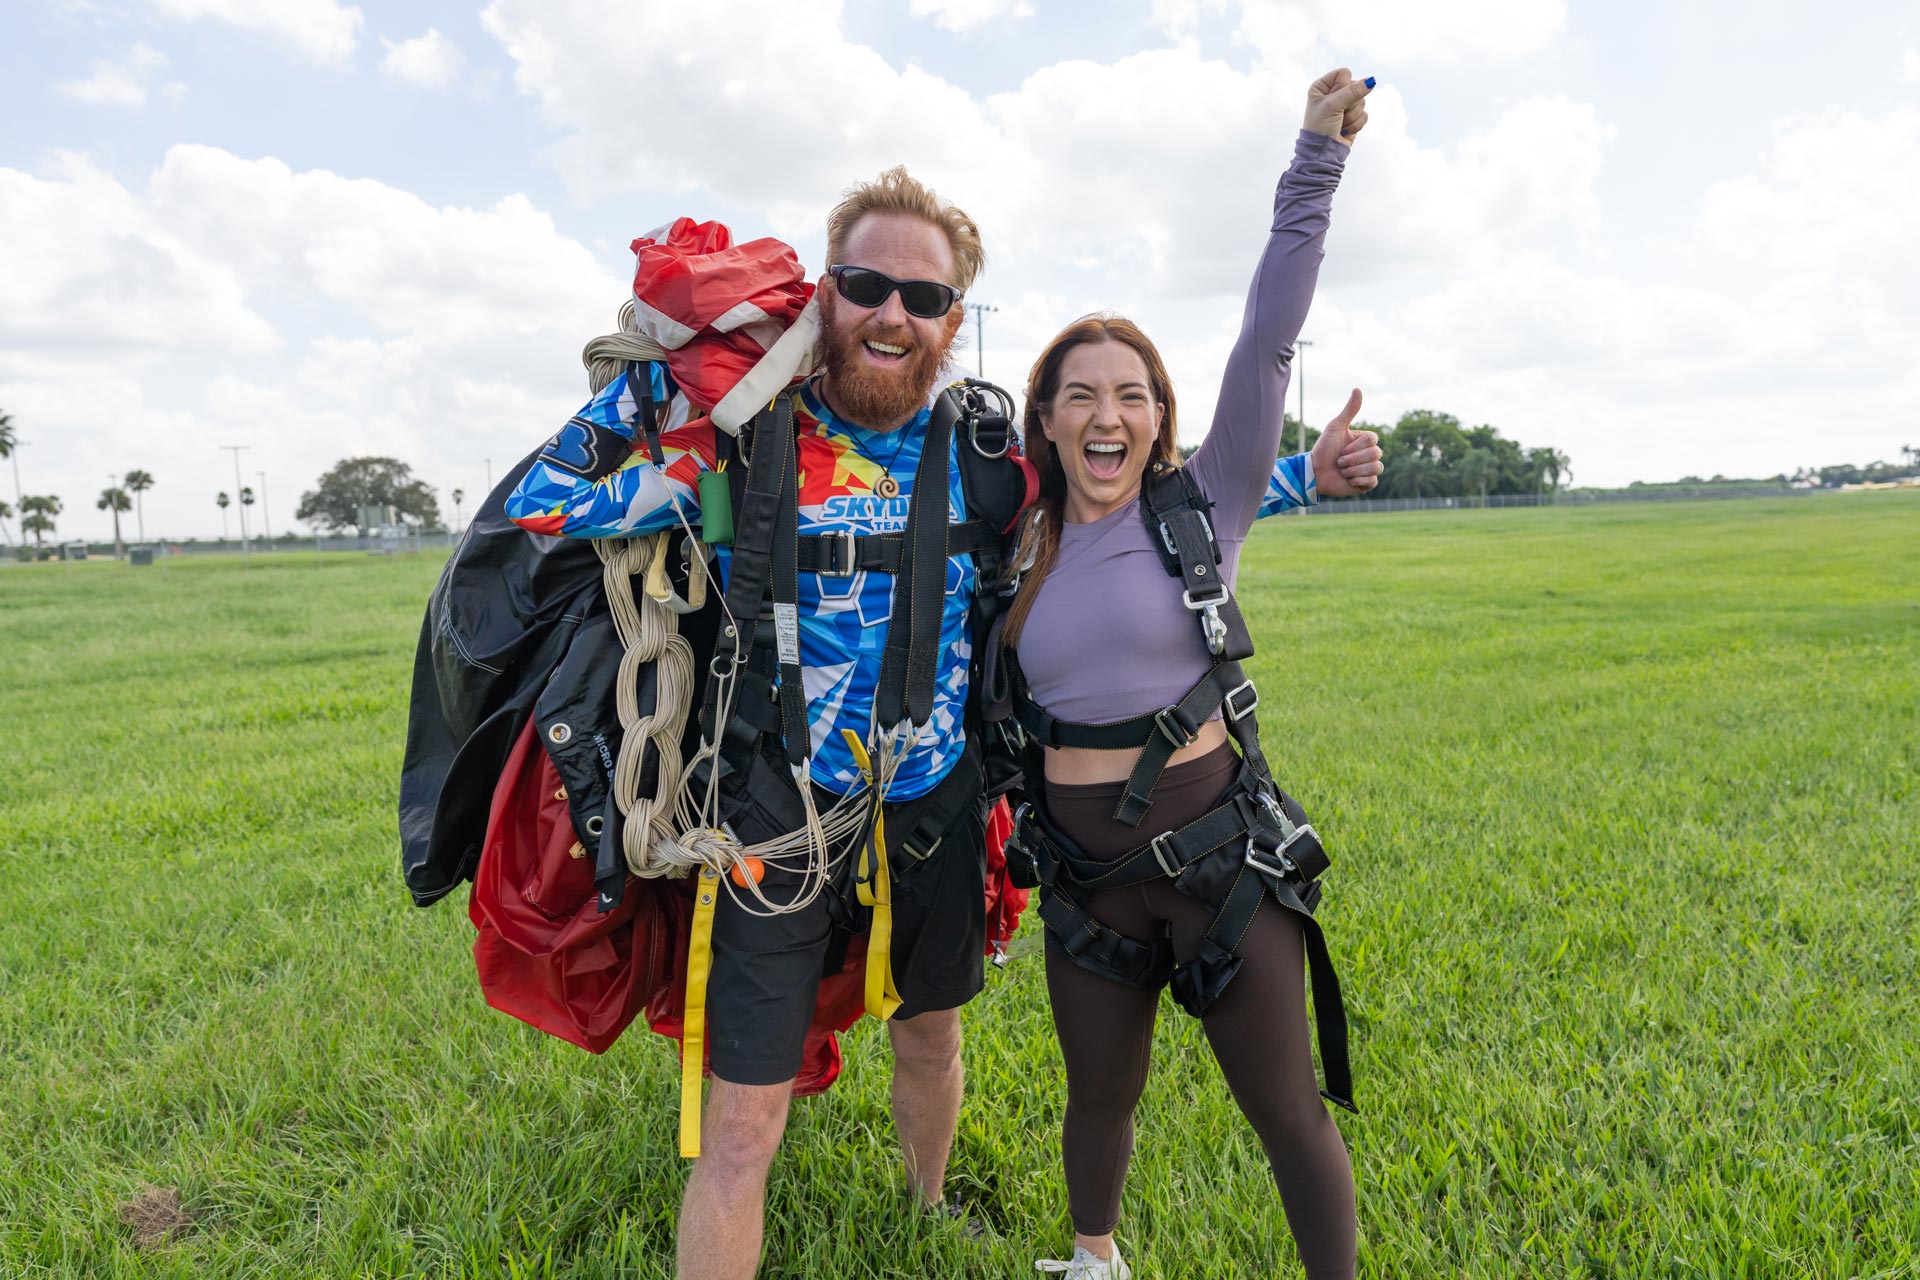 Female tandem skydiving student raises fist in the sky and smiles after landing from a skydive